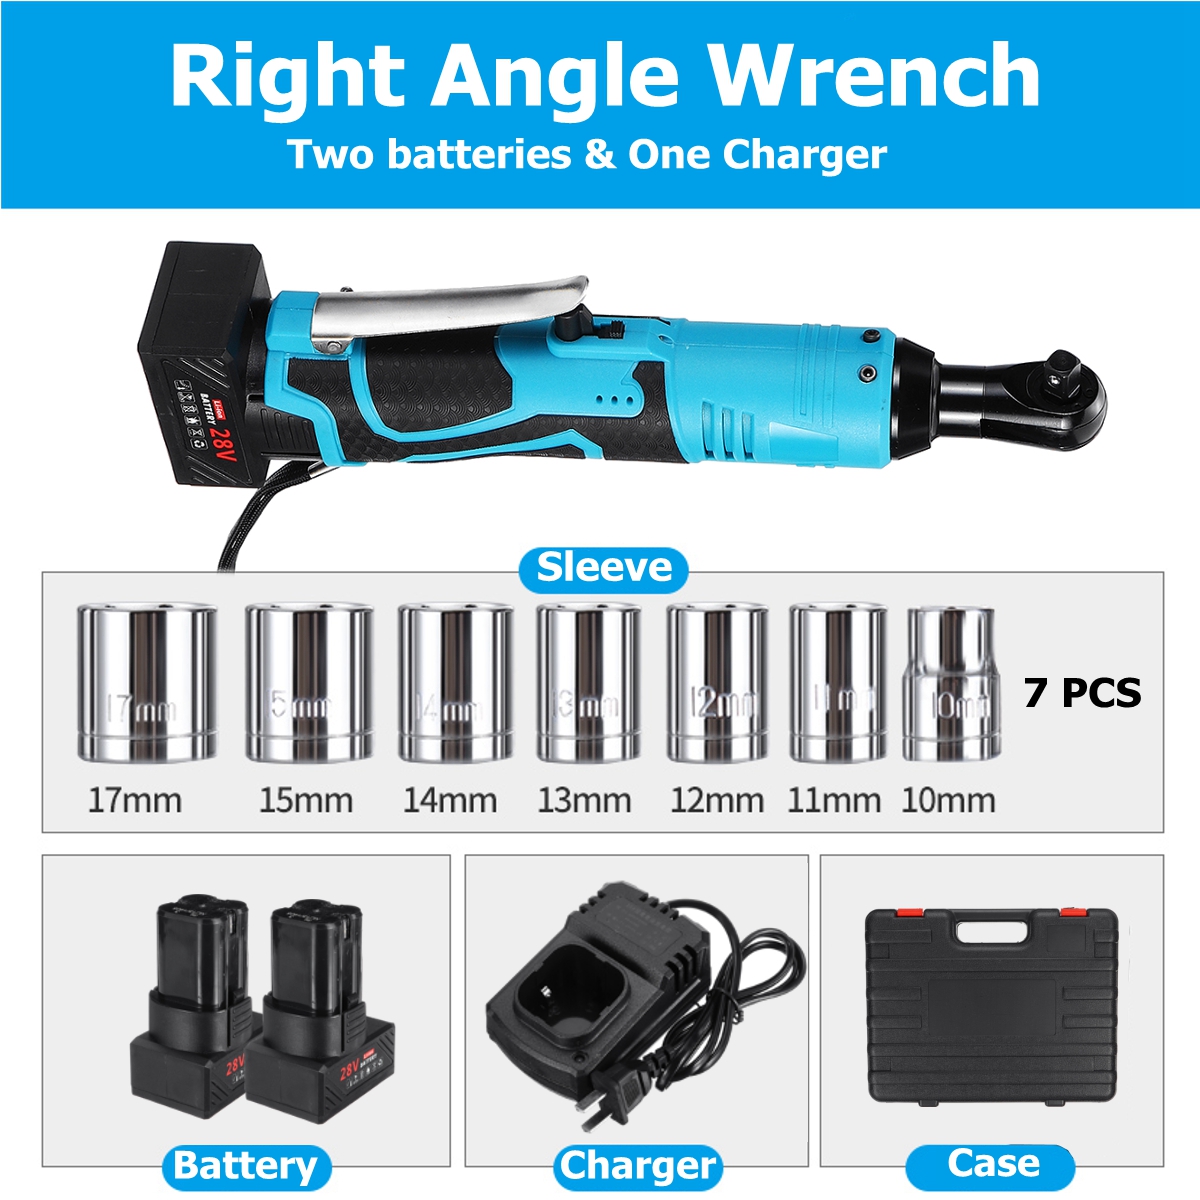 Portable-28V-Cordless-Rechargeable-Ratchet-Wrench-38-Inch-Electric-Right-Angle-Wrench-60Nm-W-2-Batte-1470794-2